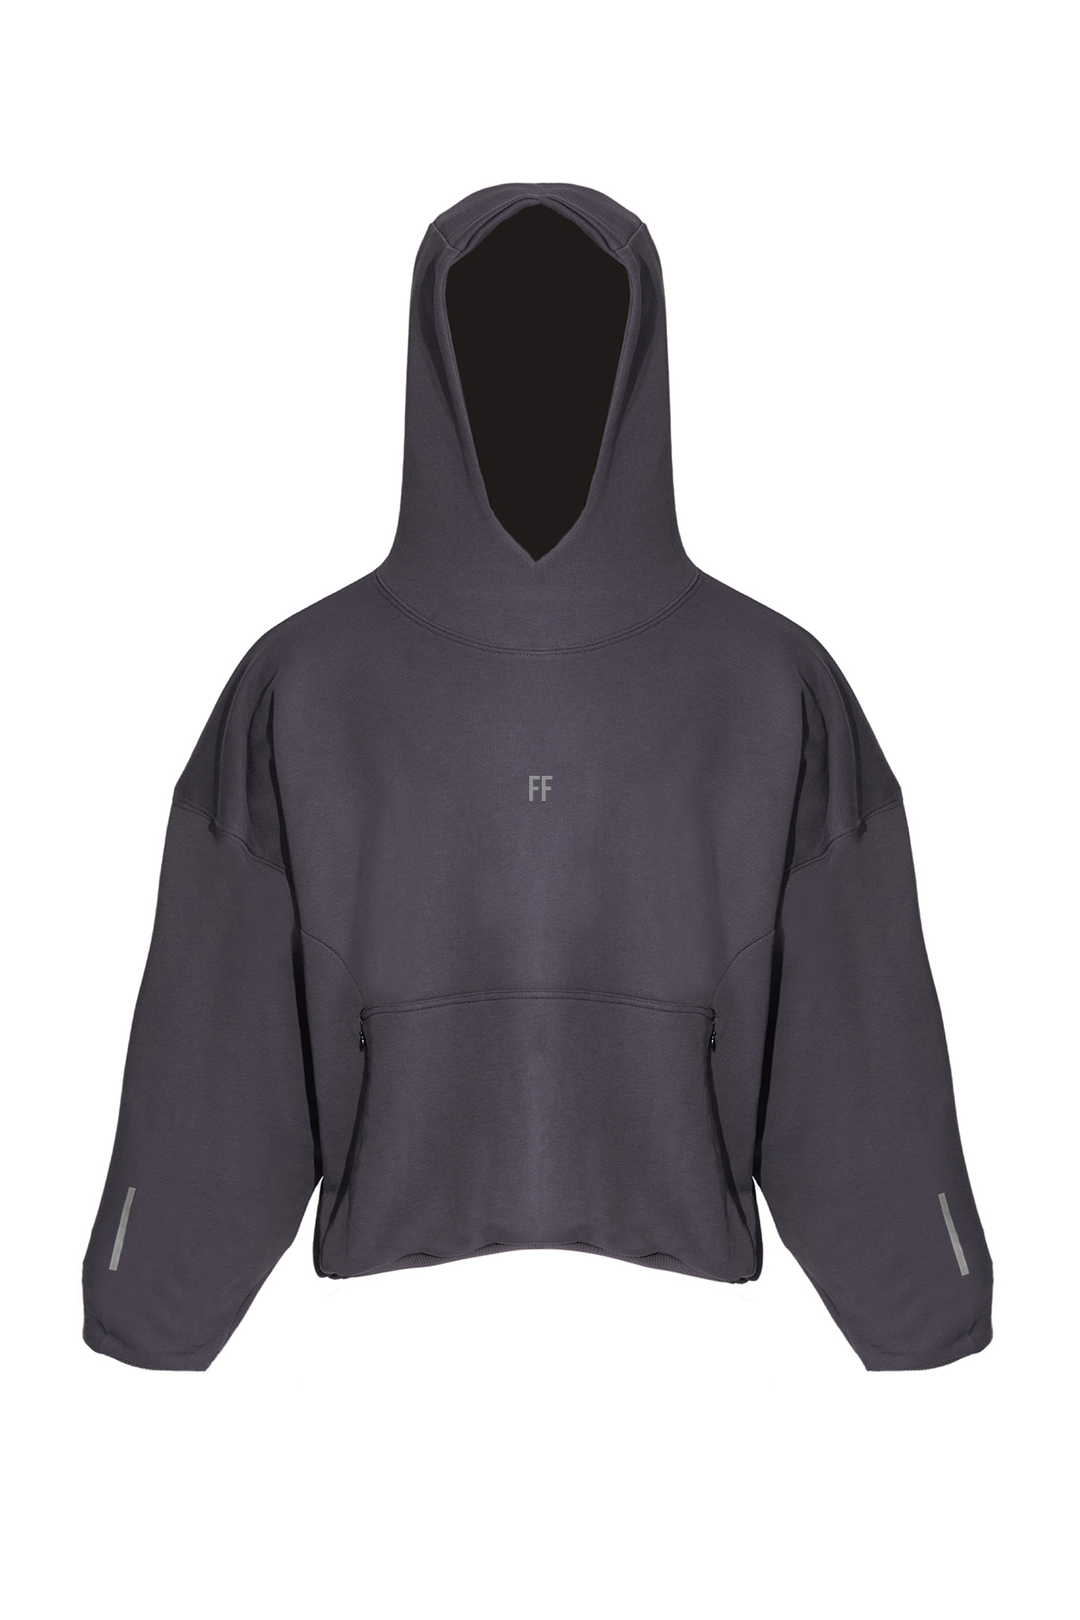 Reflective FF / Oversized Double Layer Pullover Hoodie